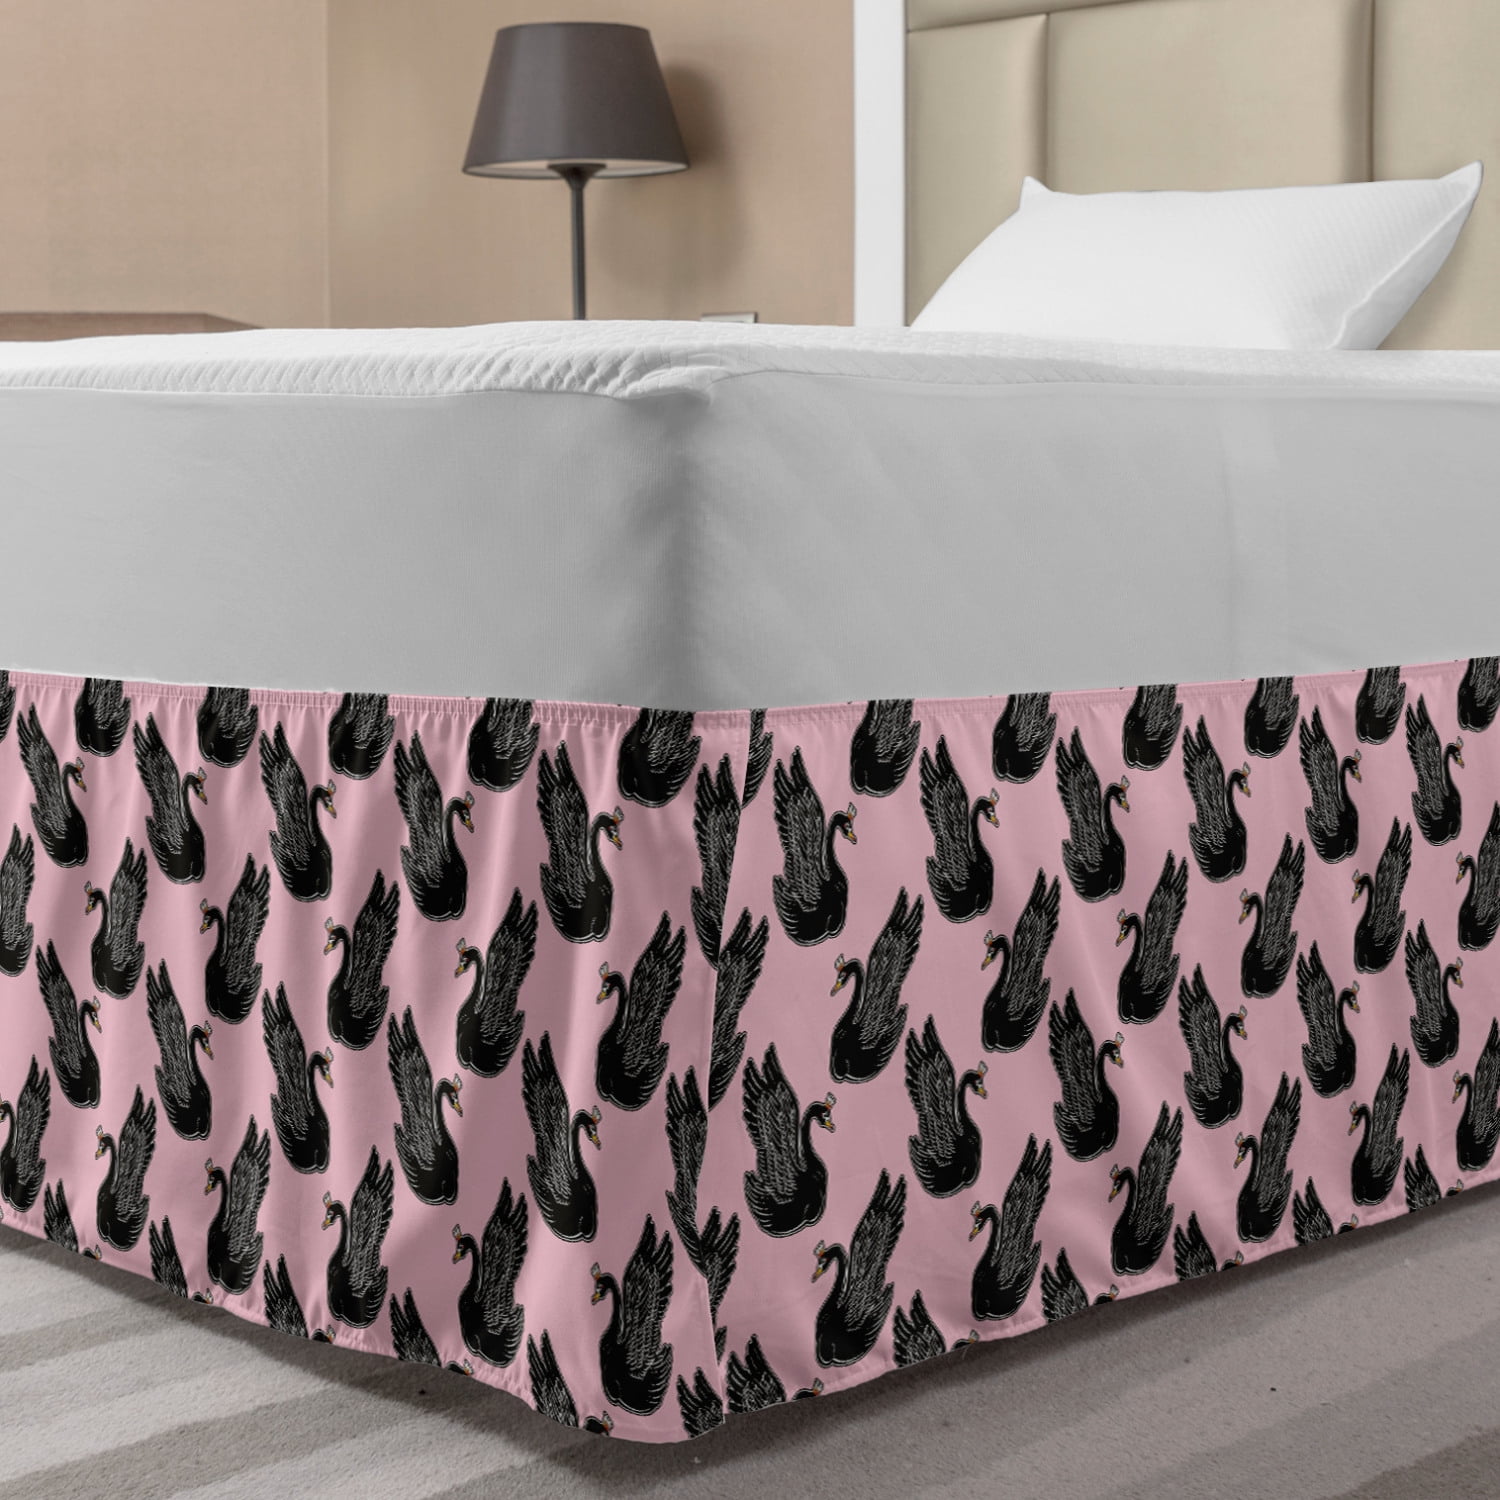 Swan Bed Skirt, Pin up Pattern with Black Swan Princess Girls Kids Nursery, Elastic Bedskirt Dust Ruffle Wrap Around for Bedding Decor, 4 Sizes, Pale Pink Black, by Ambesonne -